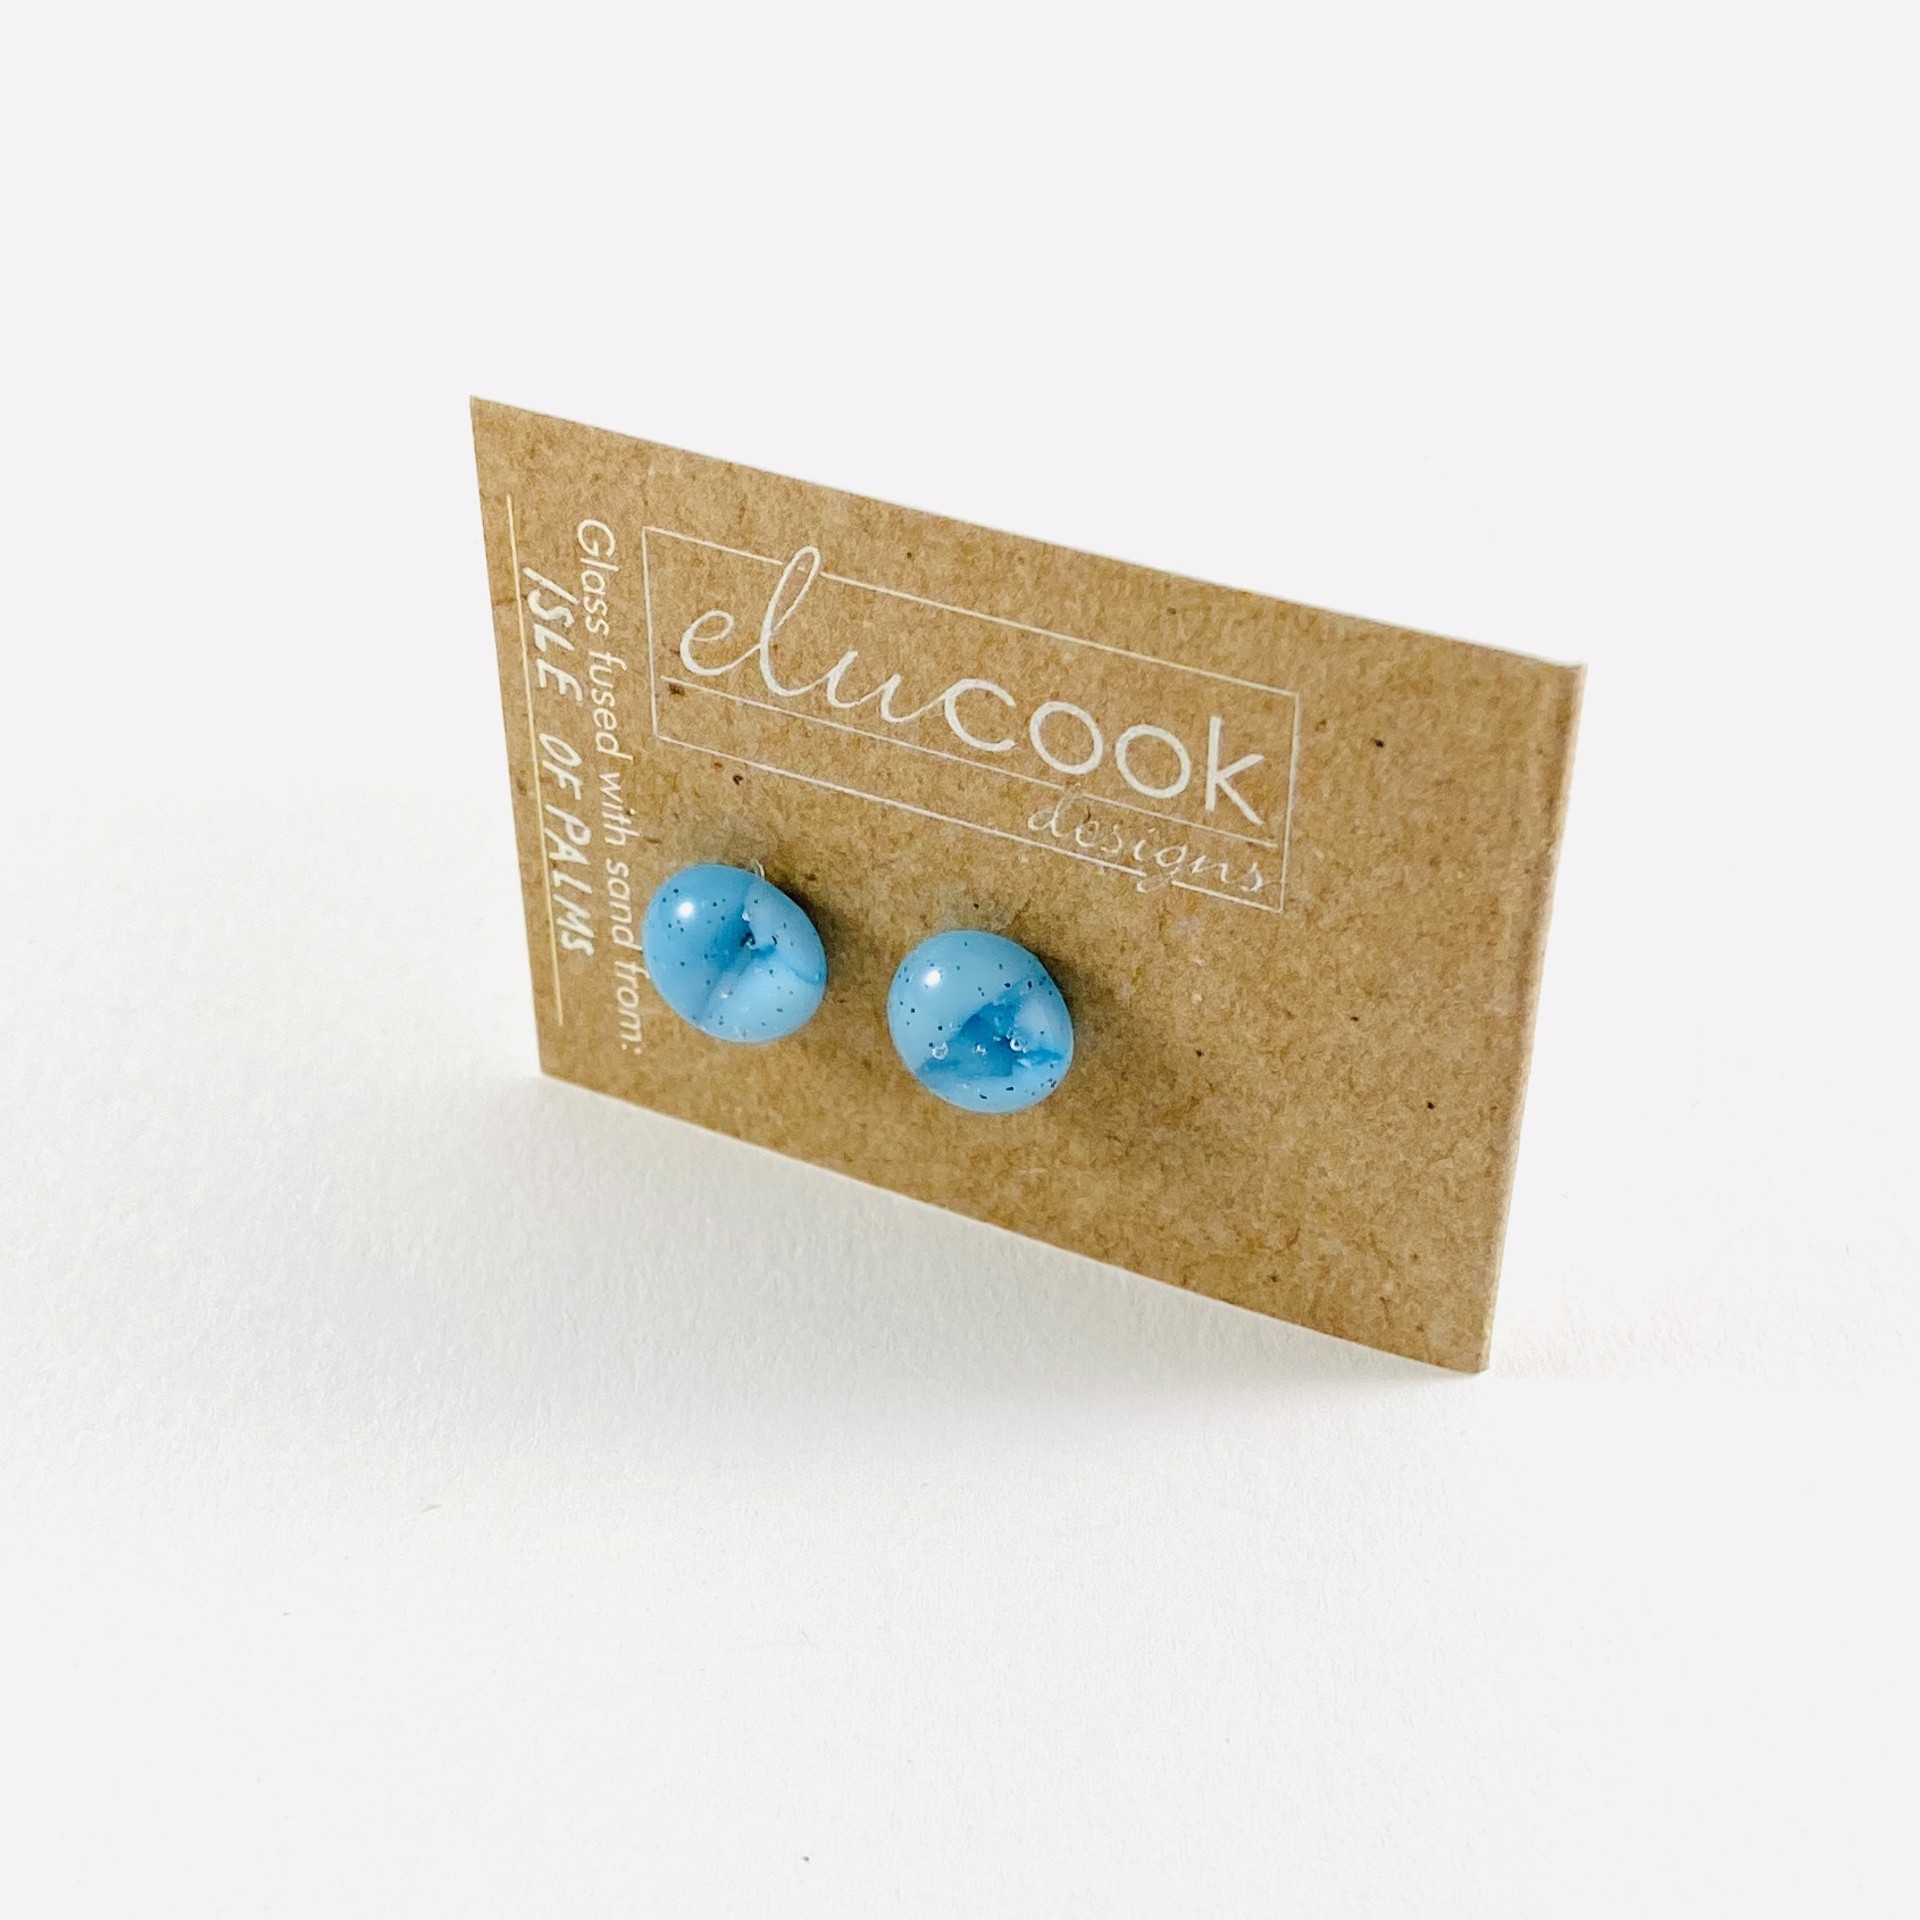 Button Earrings, 8s by Emily Cook